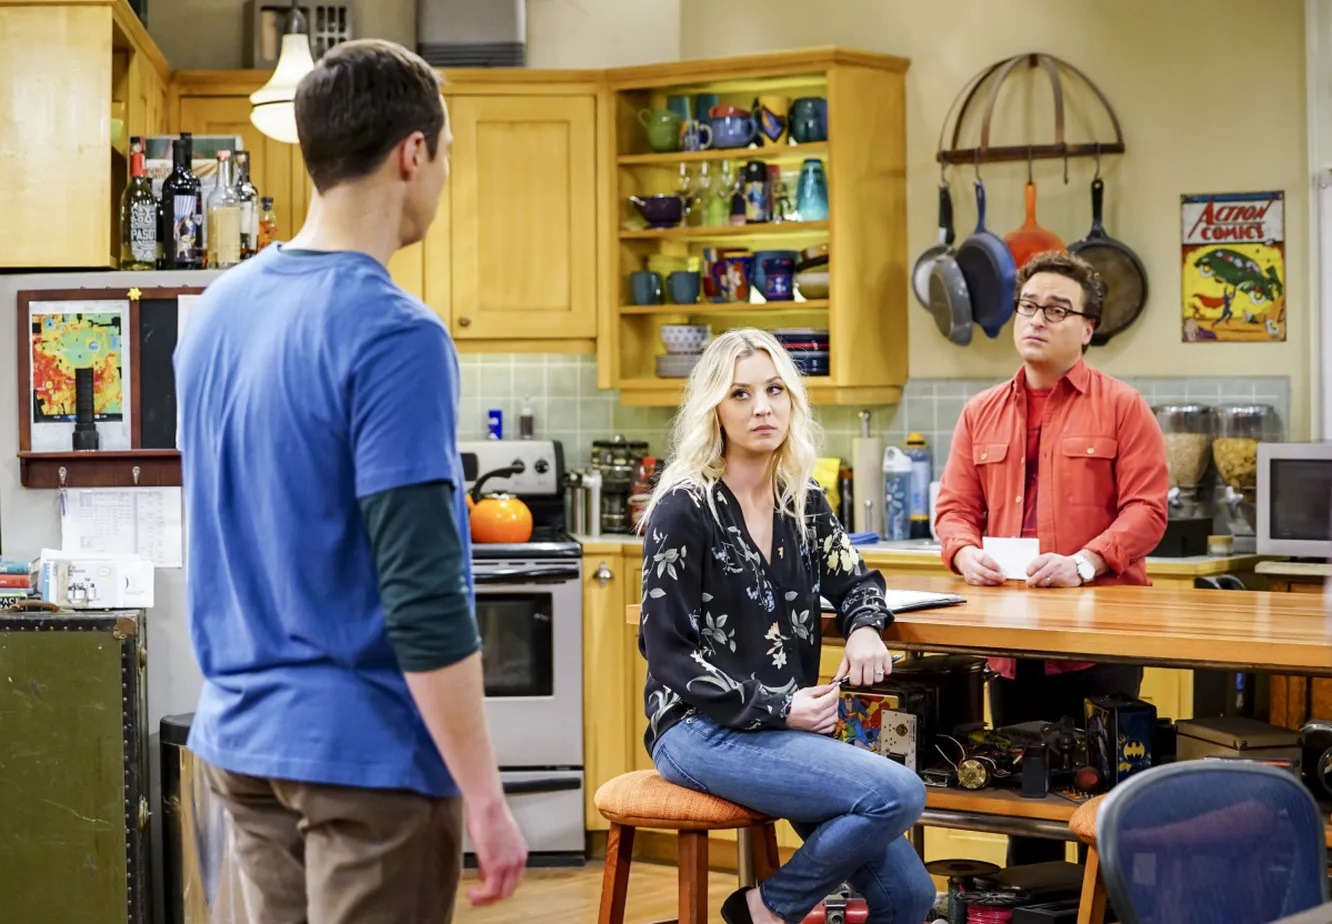 10 Big Bang Theory Details That Will Make You Want To Rewatch Immediately - image 3